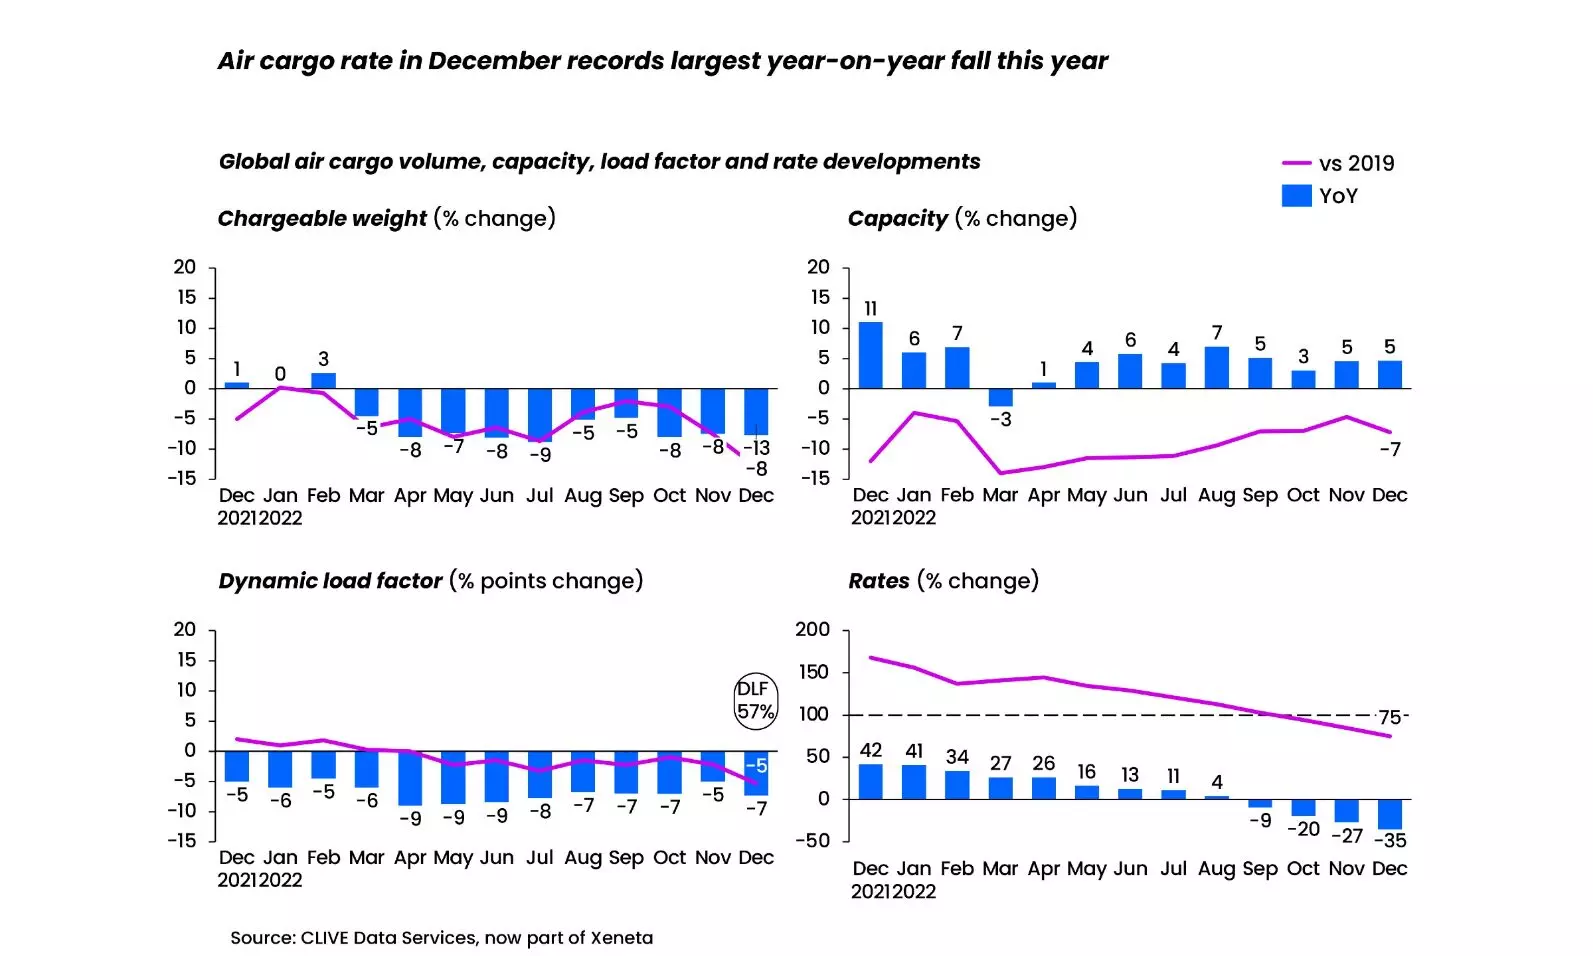 Air cargo spot rate in Dec falls 35% YoY; average rate 75% above pre-Covid